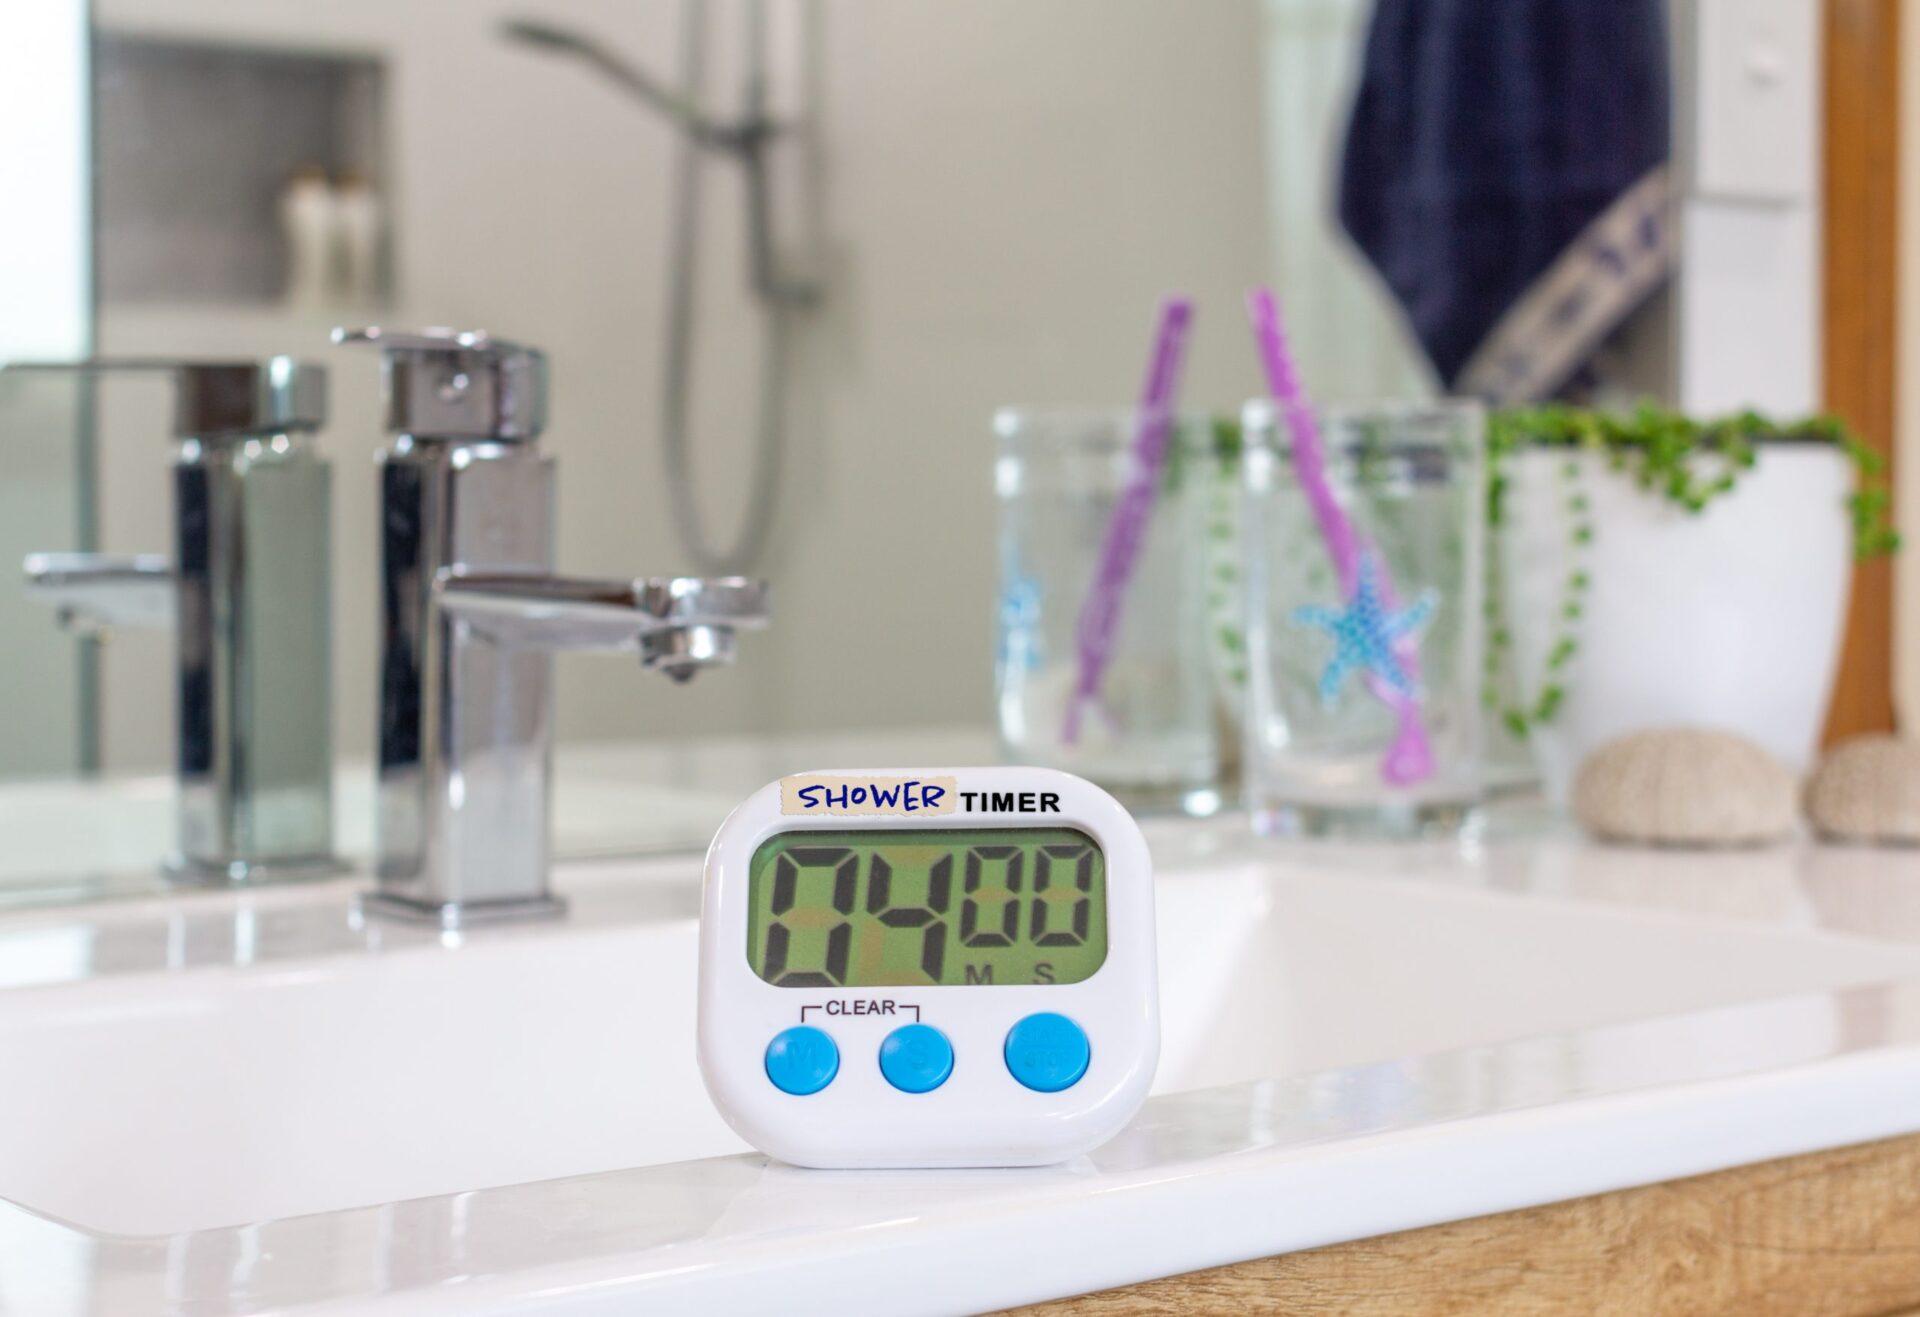 Shower timer in bathroom used to time showers to save money on water bill.